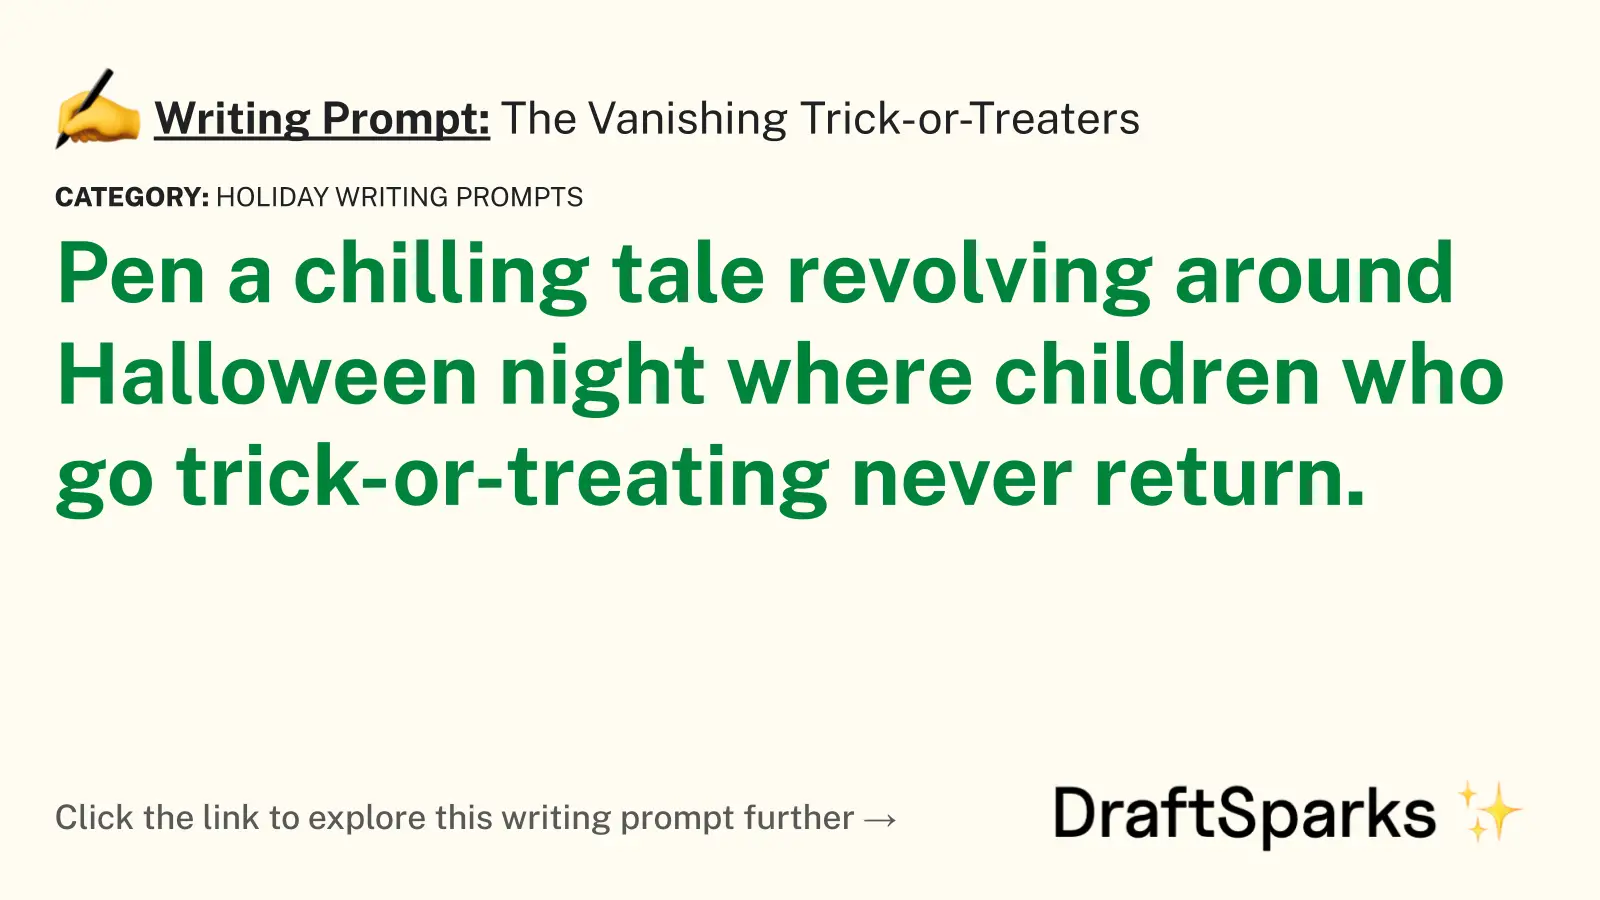 The Vanishing Trick-or-Treaters